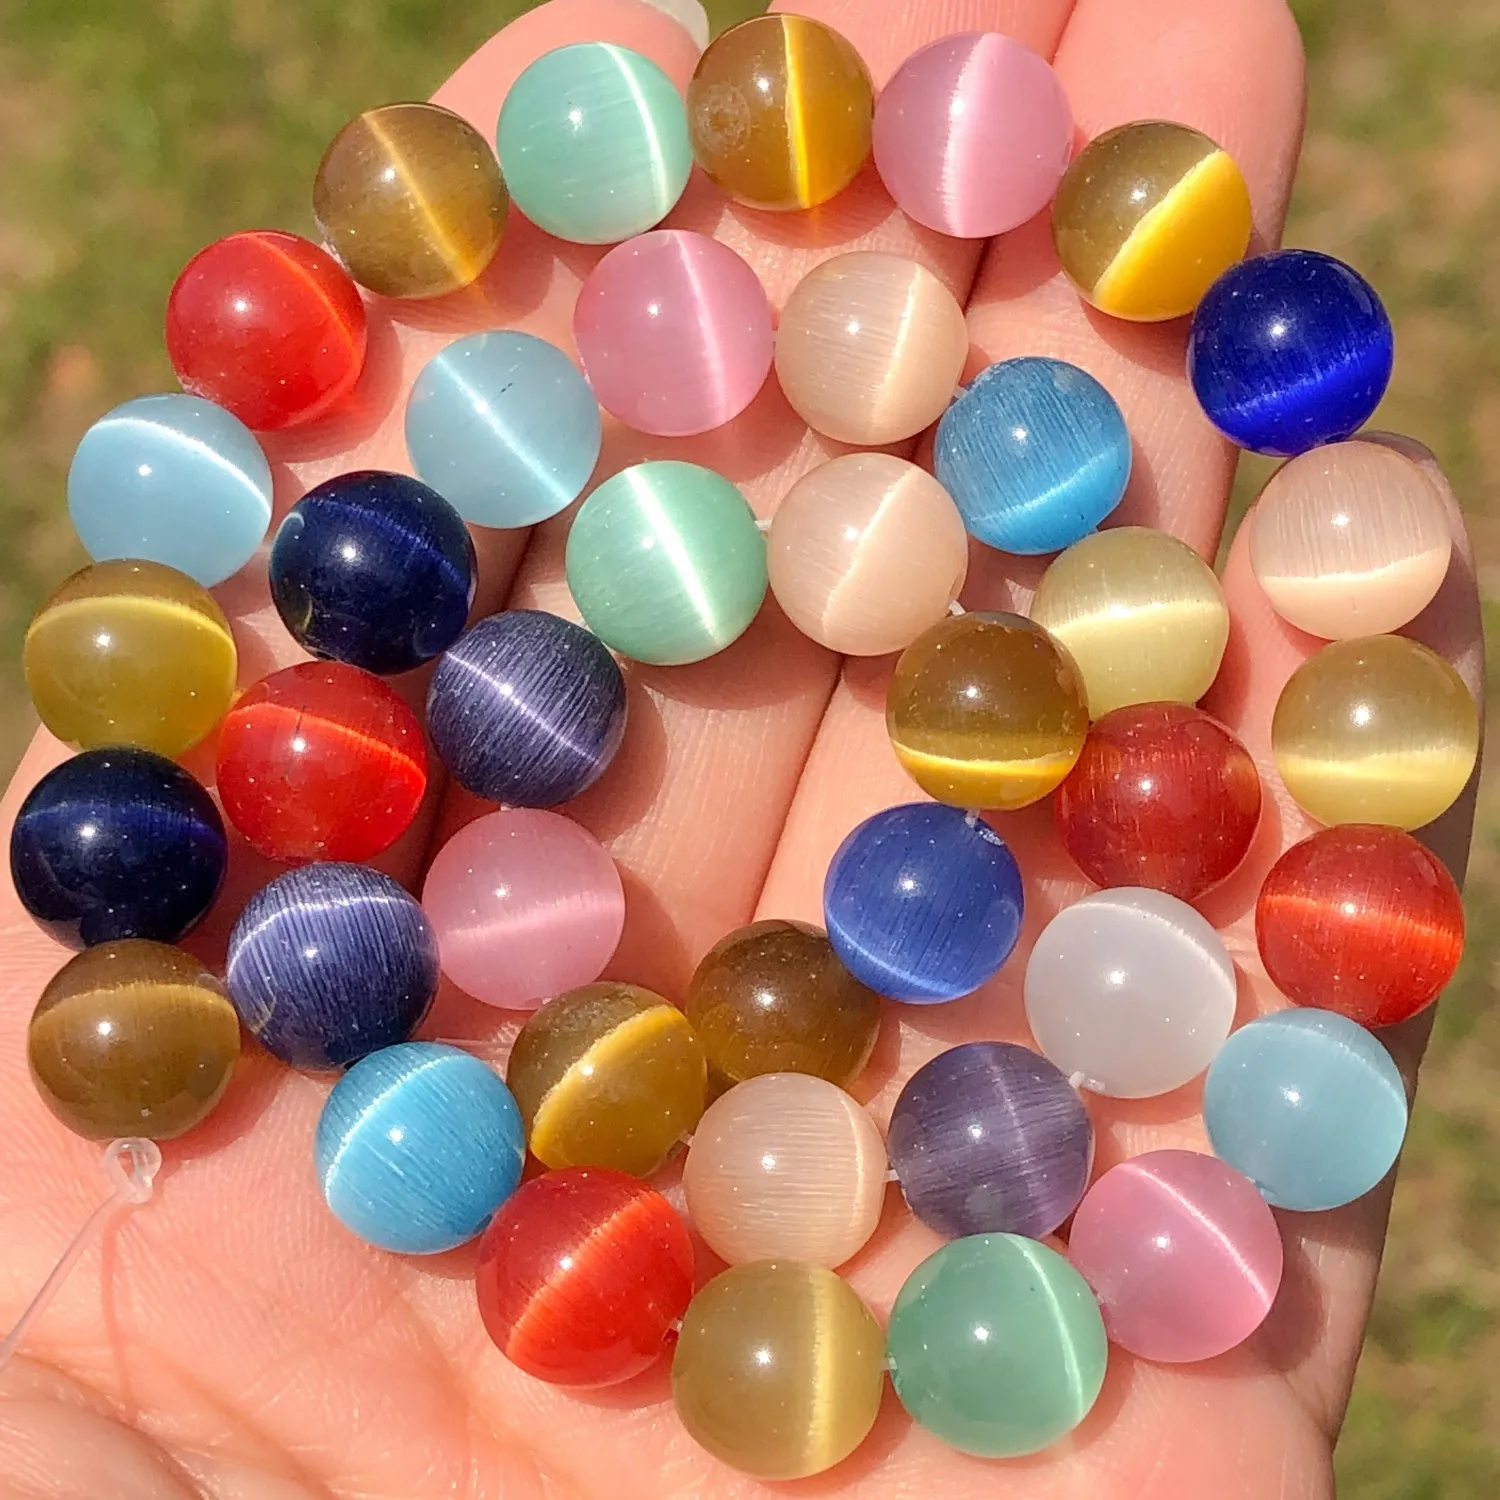 

Multicolor Cat's Eye Opal Natural Stone Glass 4/6/8/10/12MM Loose Spacer Moonstone Beads For Jewelry Making DIY Bracelet Finding